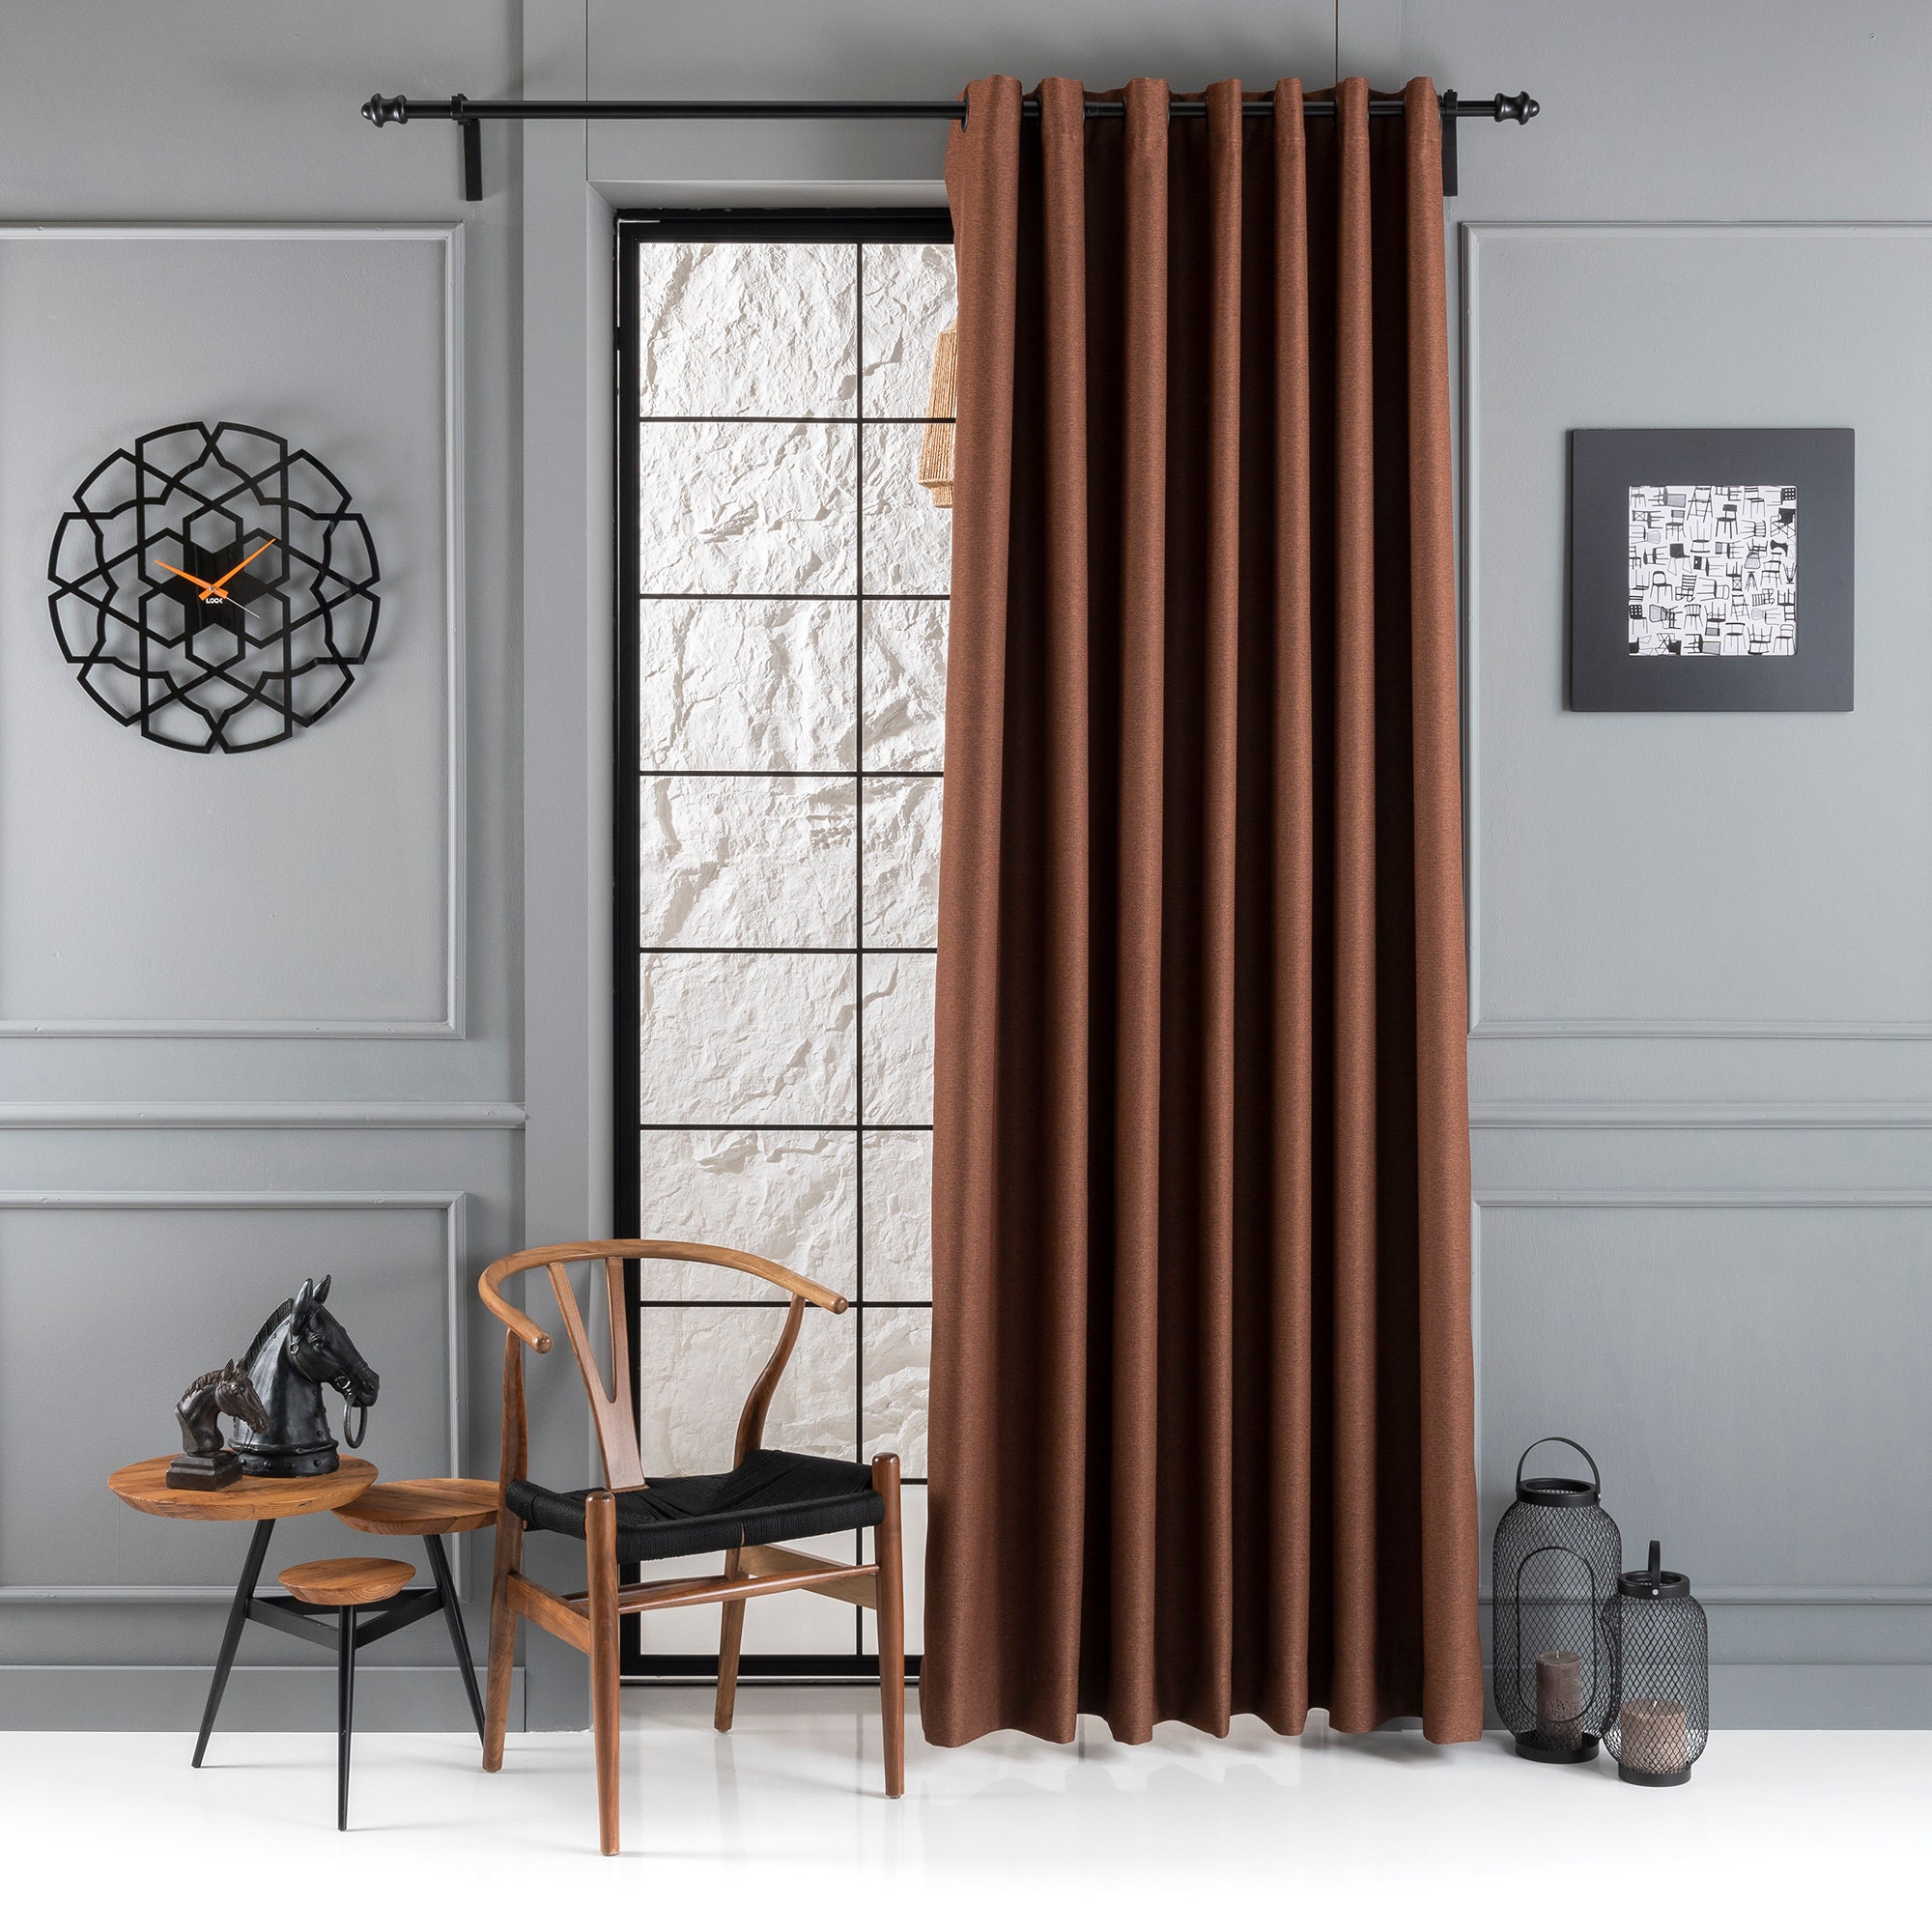 100% Blackout Curtains 21 Living Room - Etsy